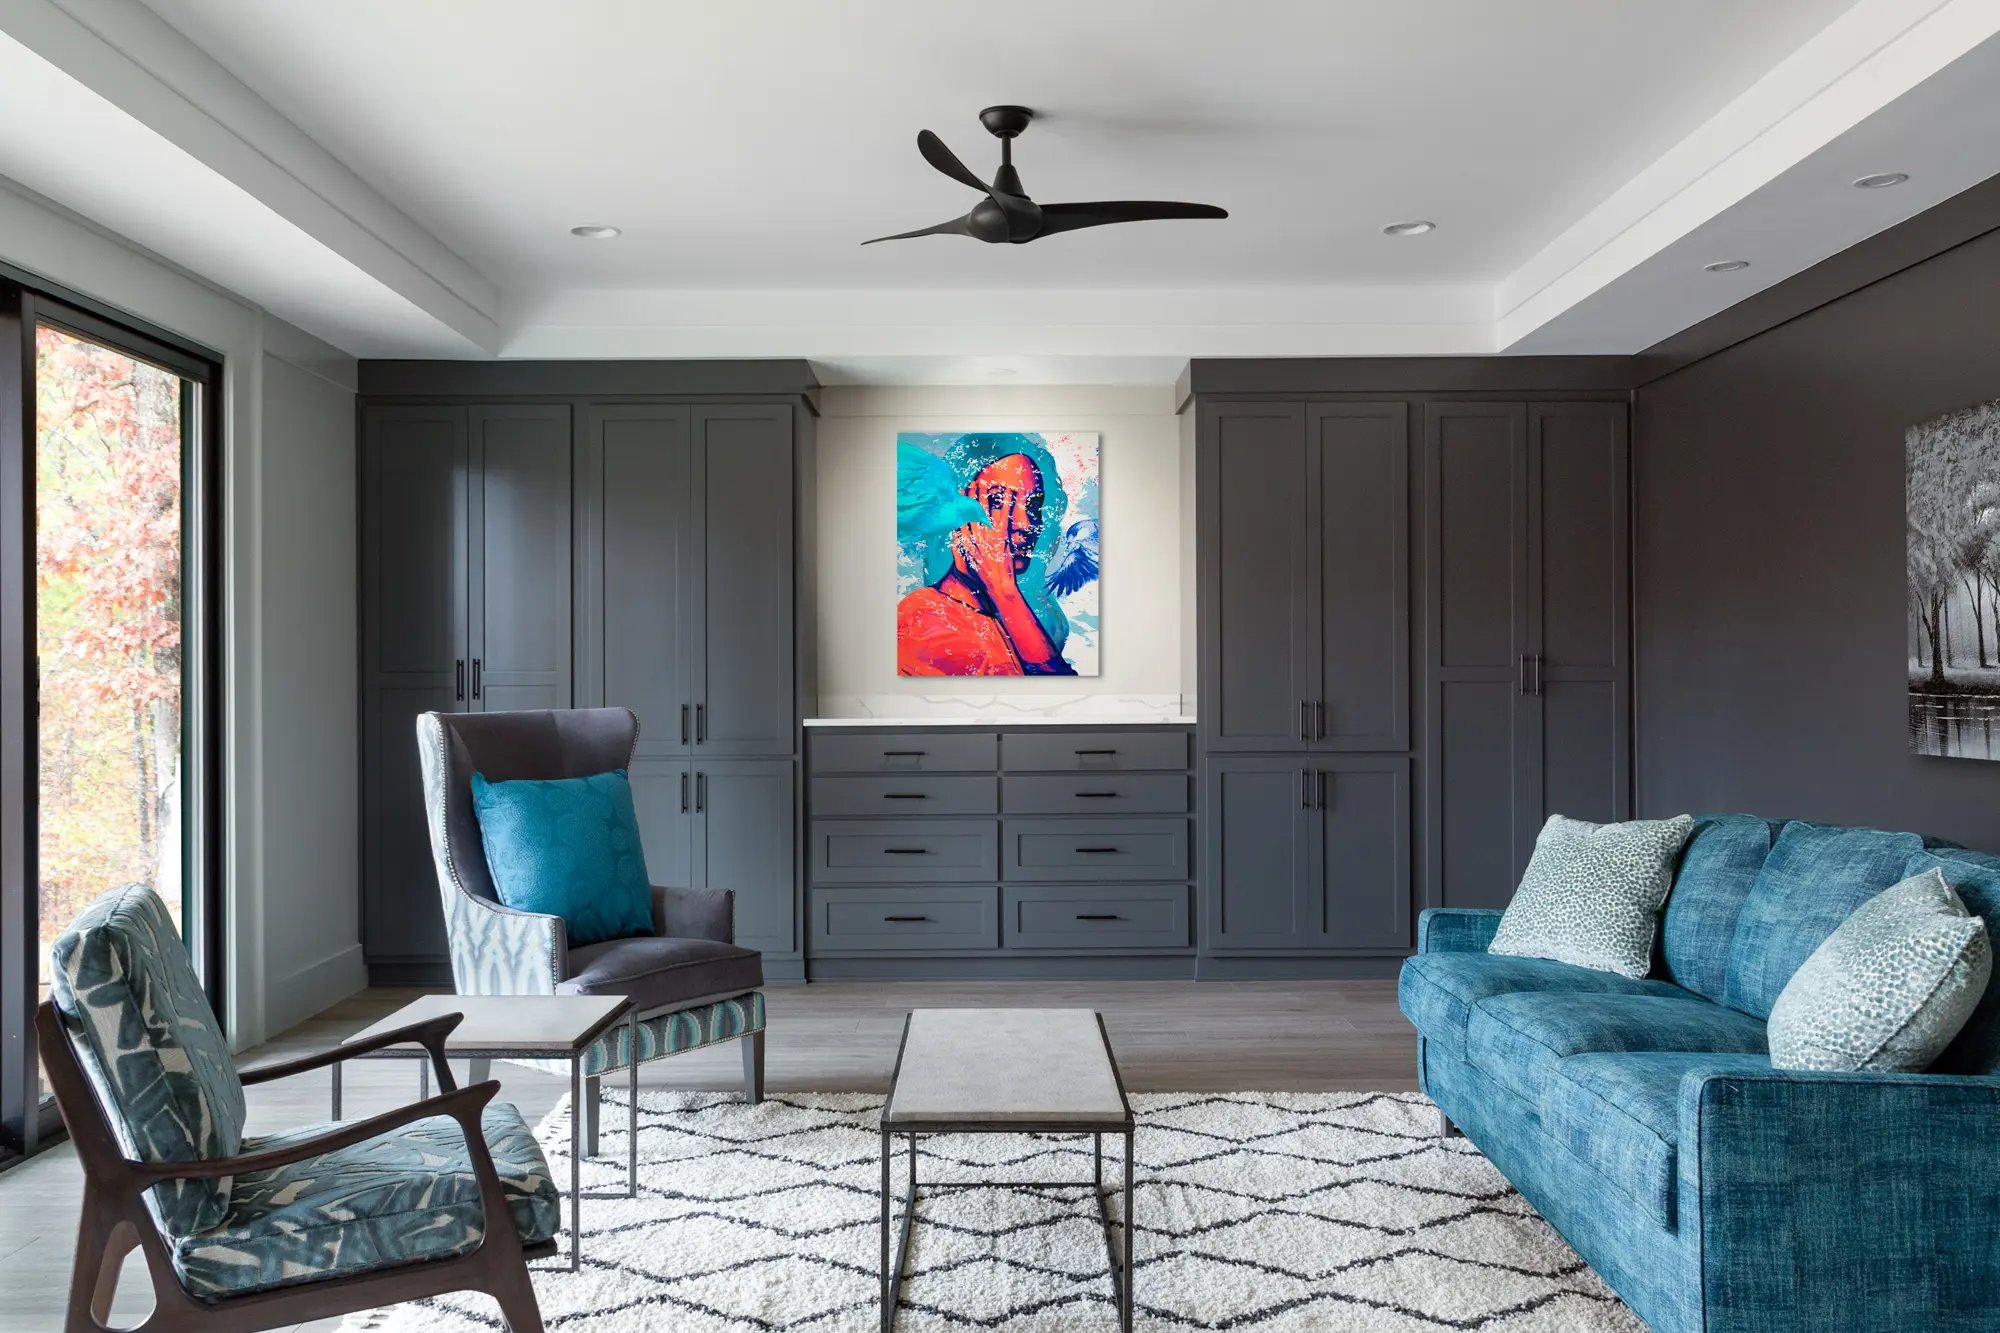 Contemporary living room with blue velvet sofa, abstract art, and custom gray cabinetry